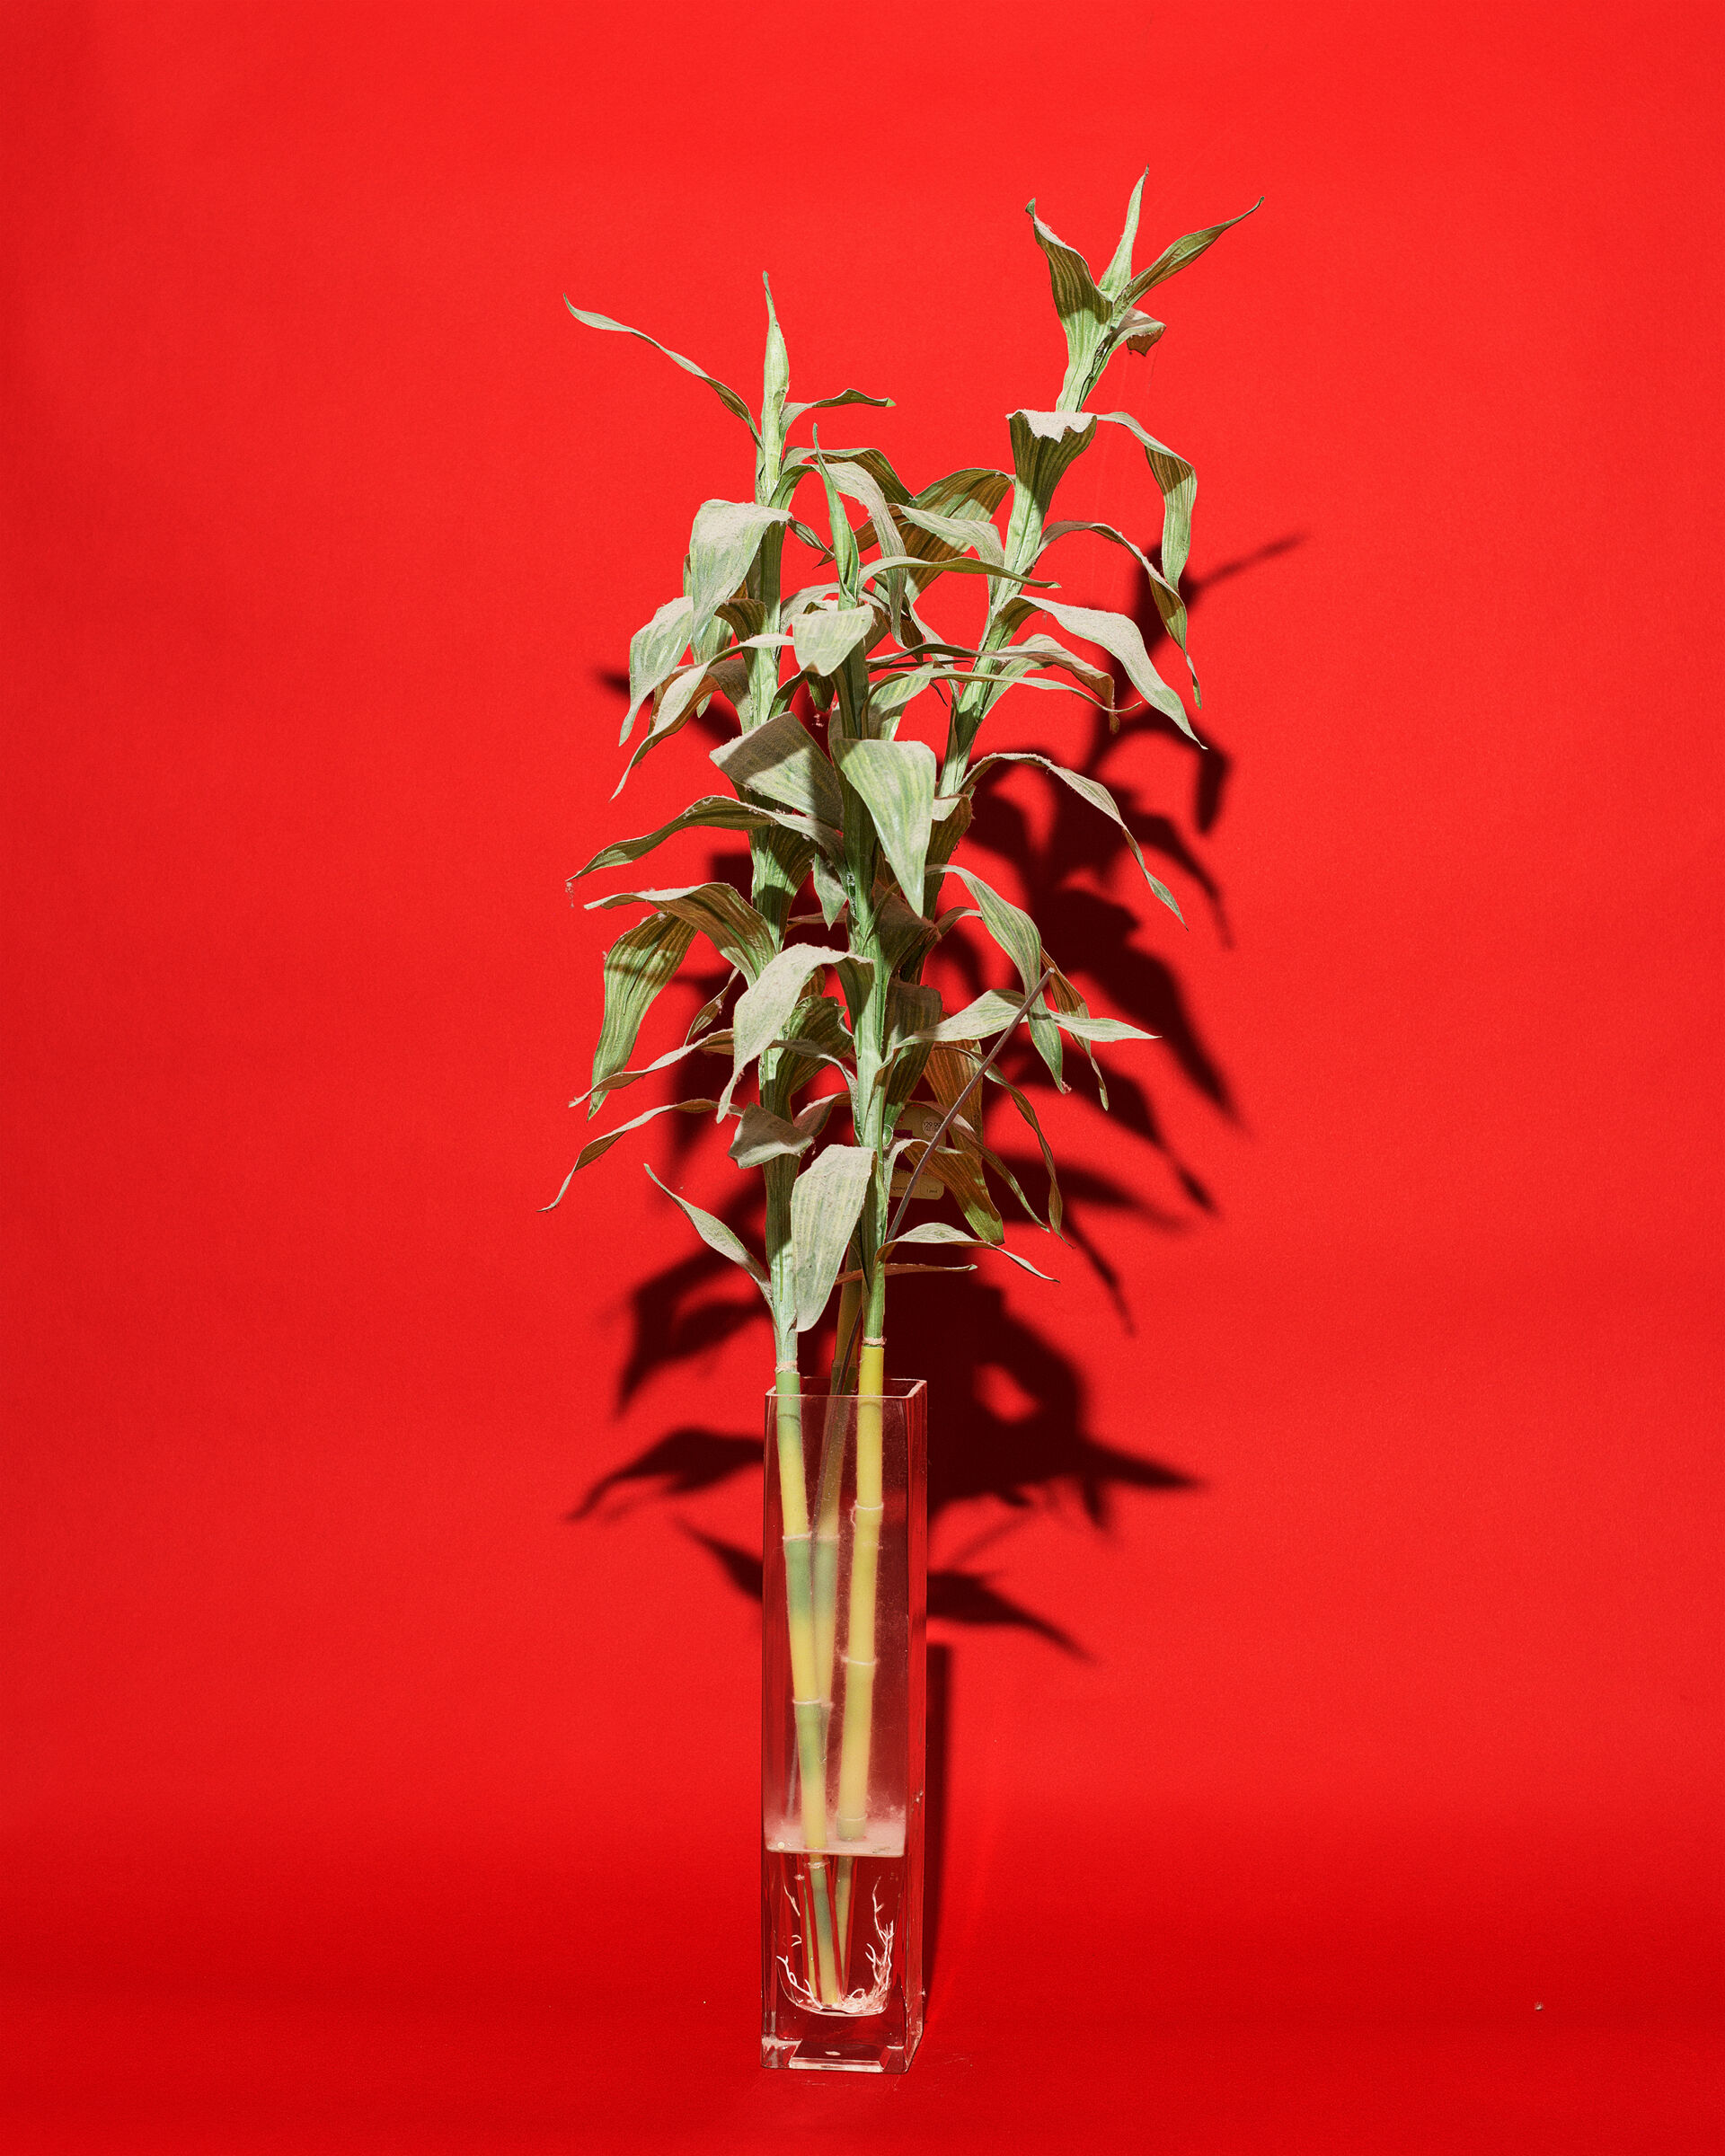 Sprigs of bamboo in a small glass vase, set against a bright red background.